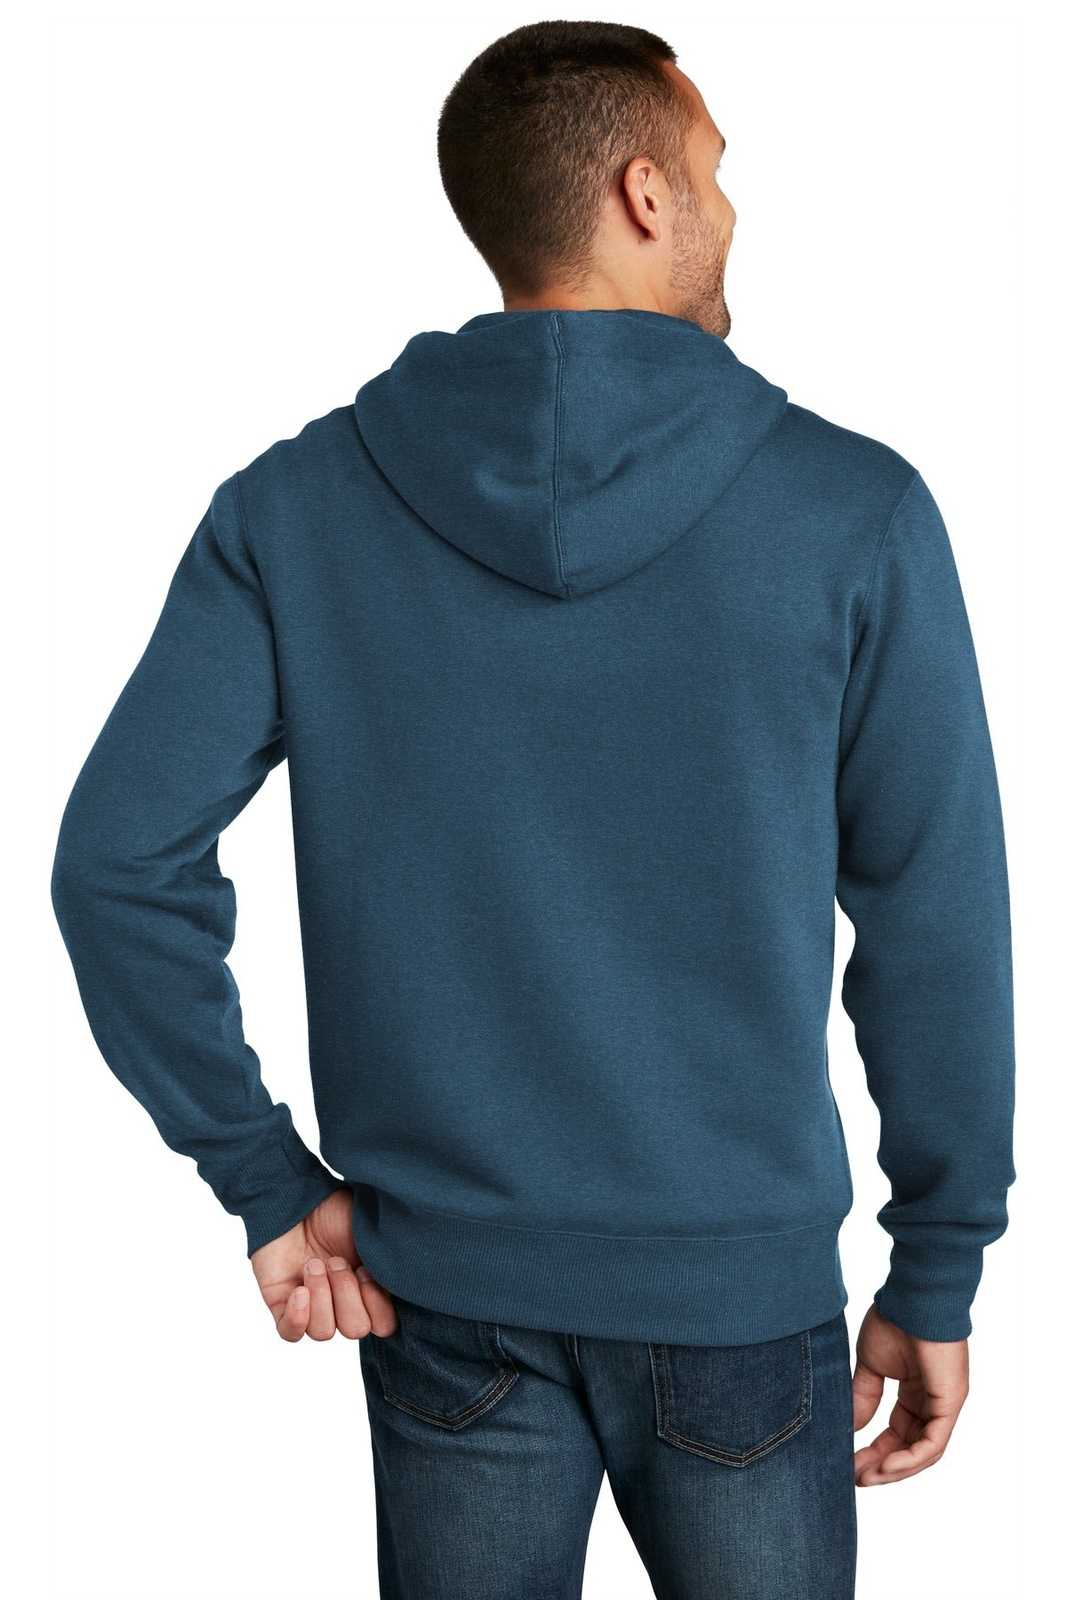 District DT1103 Perfect Weight Fleece Full-Zip Hoodie - Heathered Poseidon Blue - HIT a Double - 2